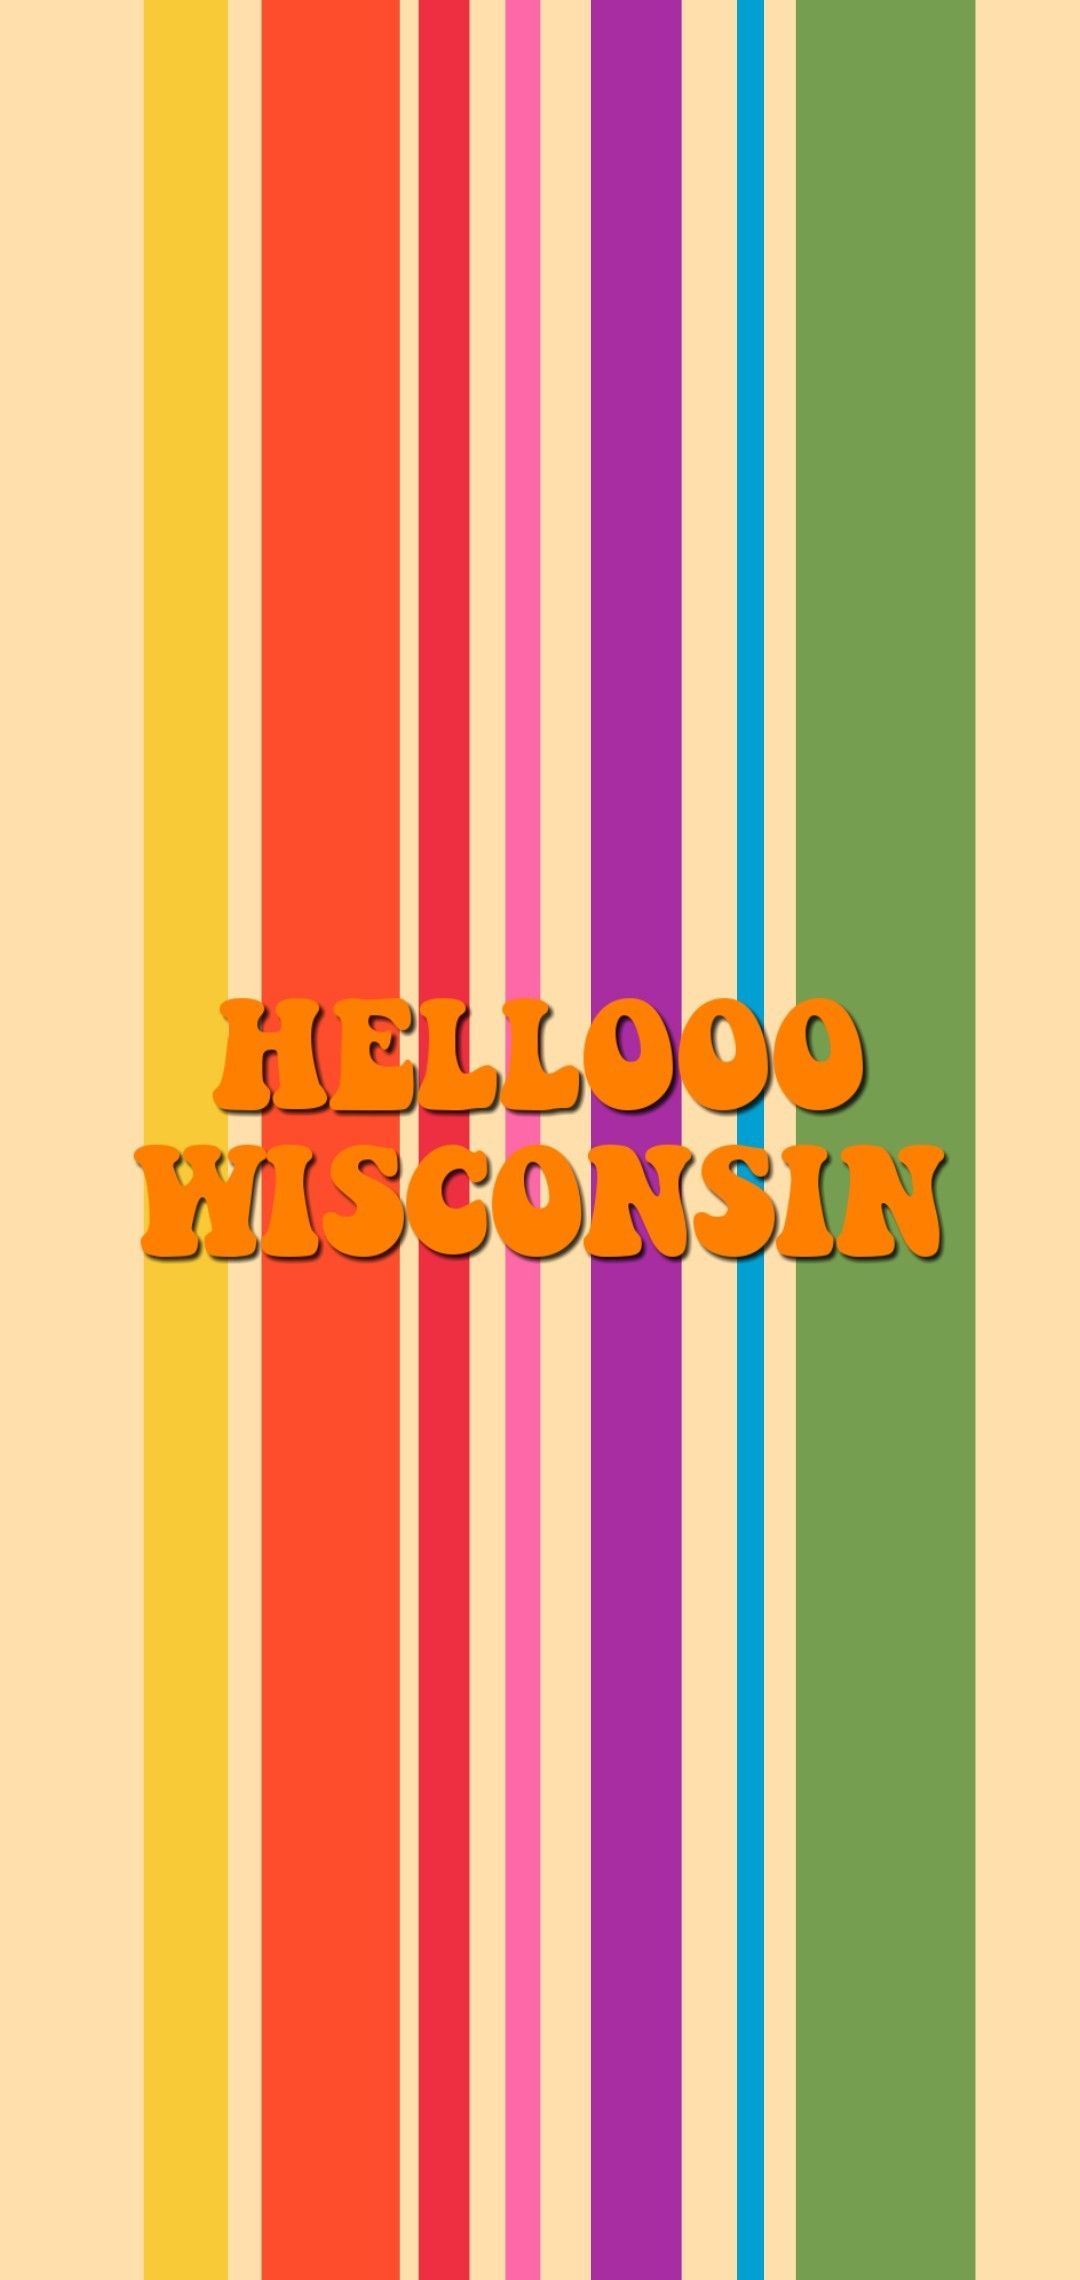 IPhone wallpaper with rainbow stripes and the words 